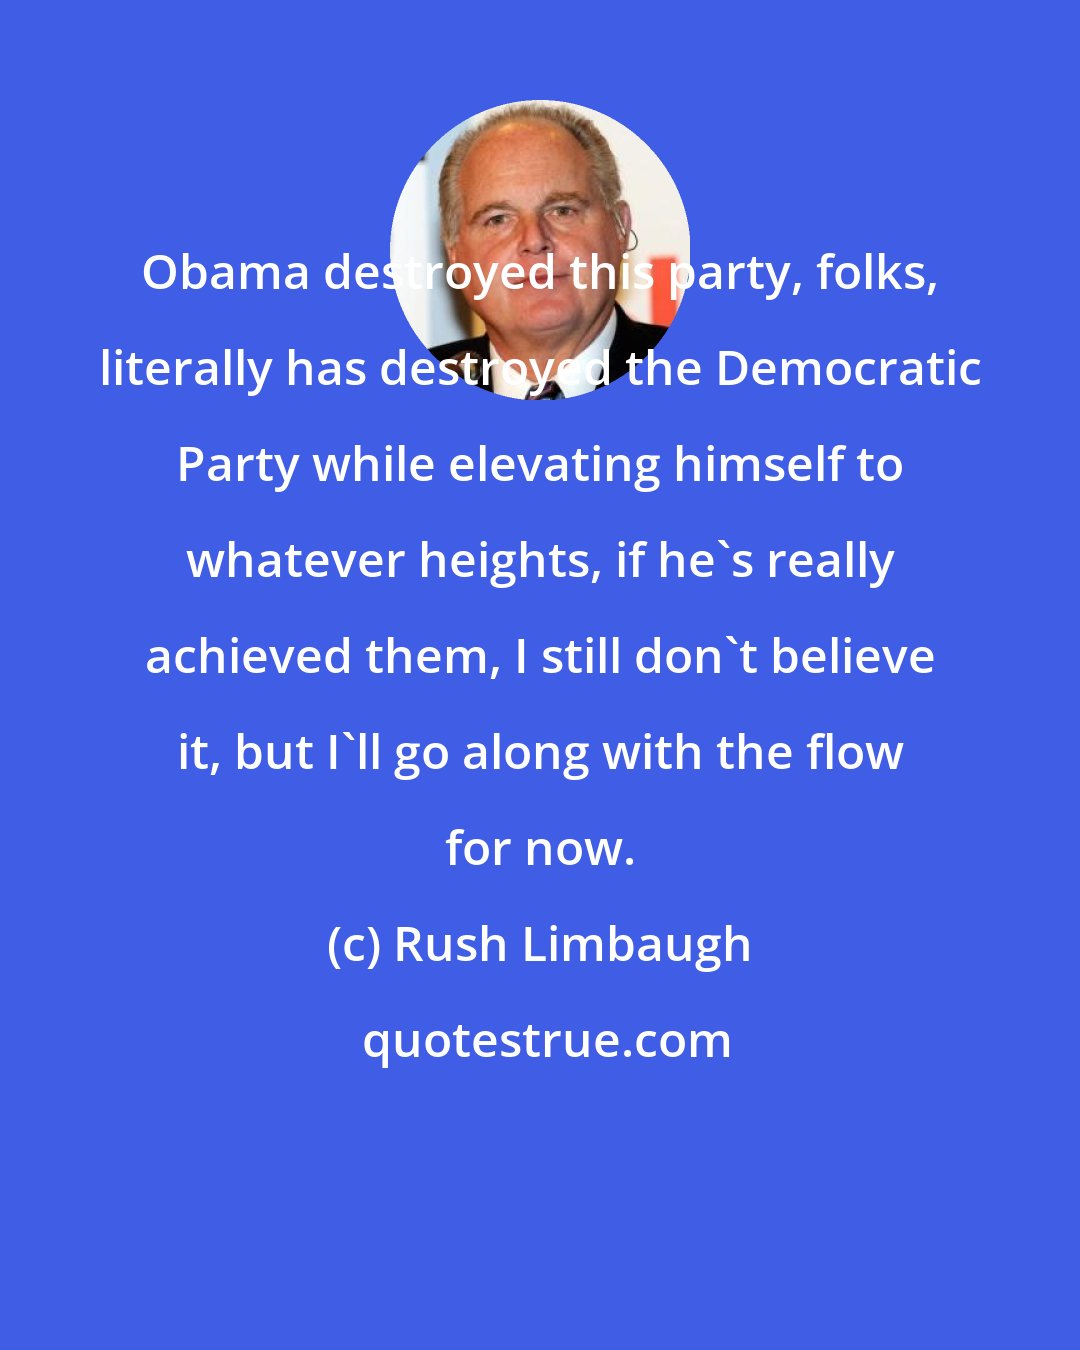 Rush Limbaugh: Obama destroyed this party, folks, literally has destroyed the Democratic Party while elevating himself to whatever heights, if he's really achieved them, I still don't believe it, but I'll go along with the flow for now.